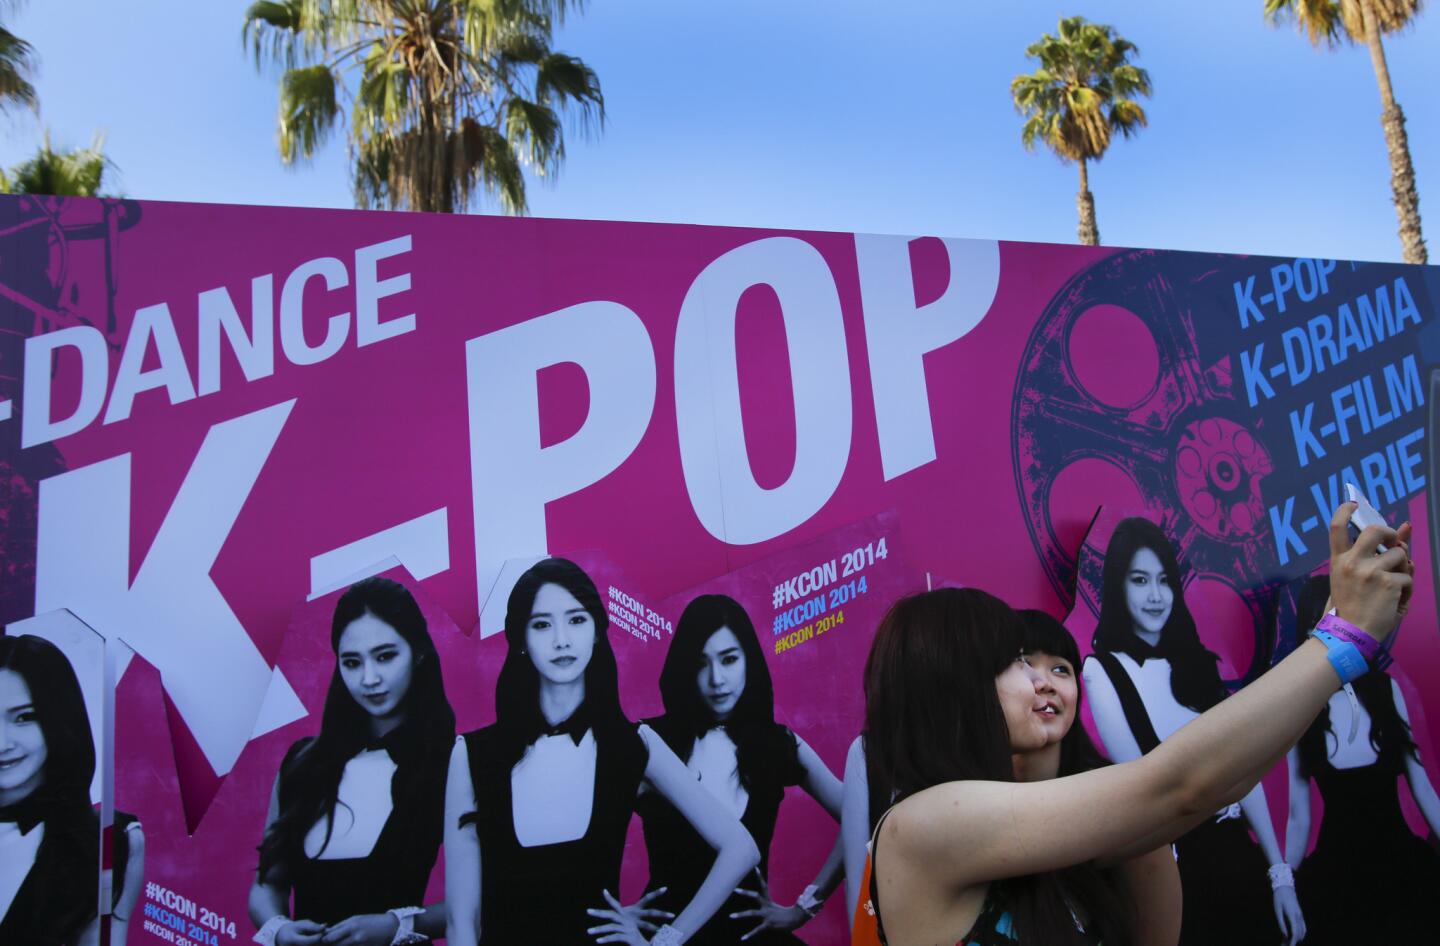 The K-pop convention took place at the Los Angeles Sports Arena on Saturday evening, bringing Korean pop music fans together from far and wide. Nancy Huynh, right, and Jina Tran pose for a "selfie" in front of a banner promoting some of the acts performing at the KCON concert at the Sports Arena.